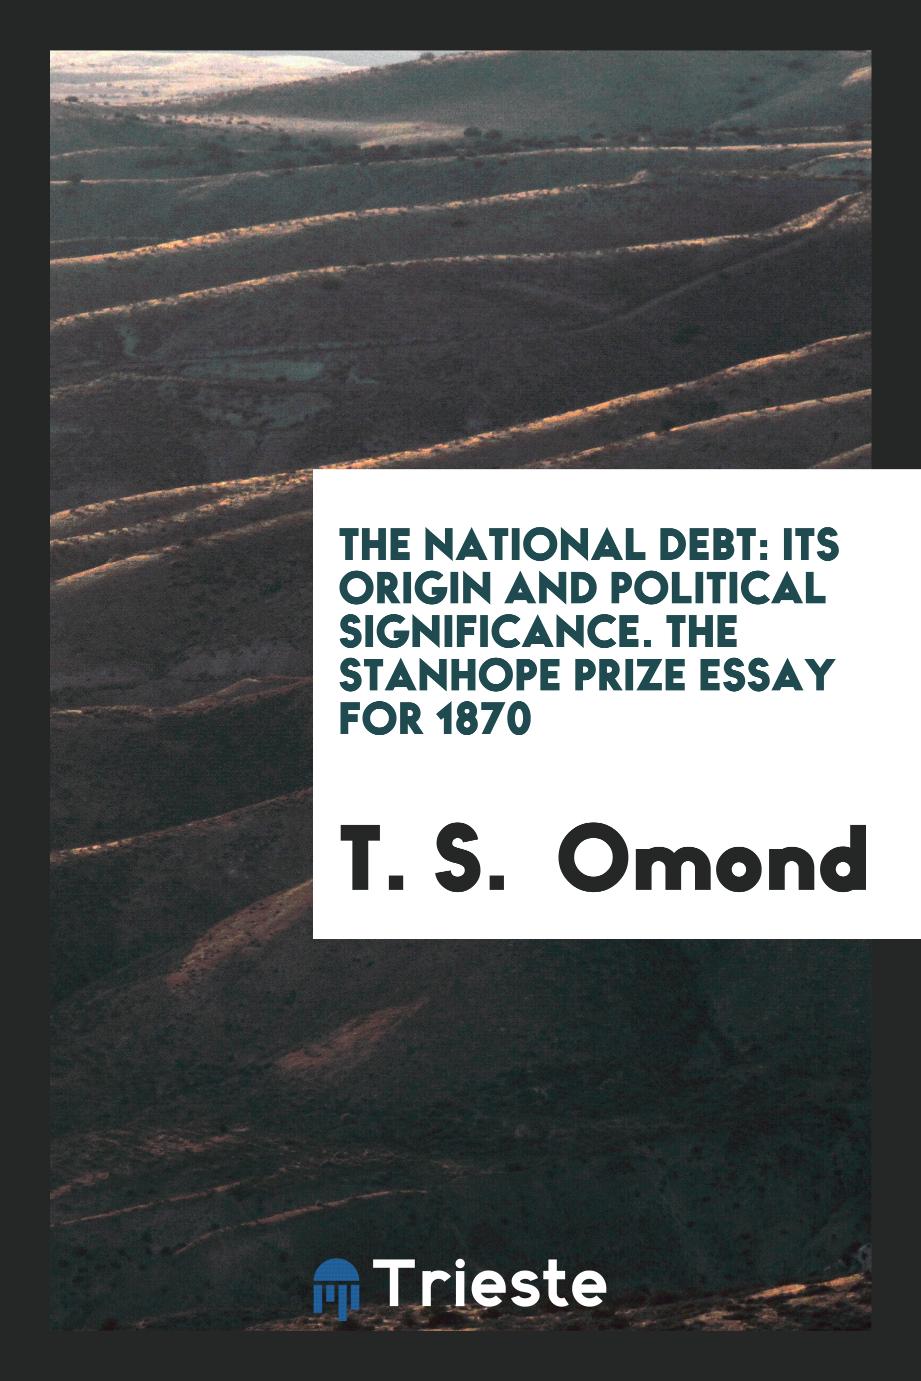 The National Debt: Its Origin and Political Significance. The stanhope prize essay for 1870